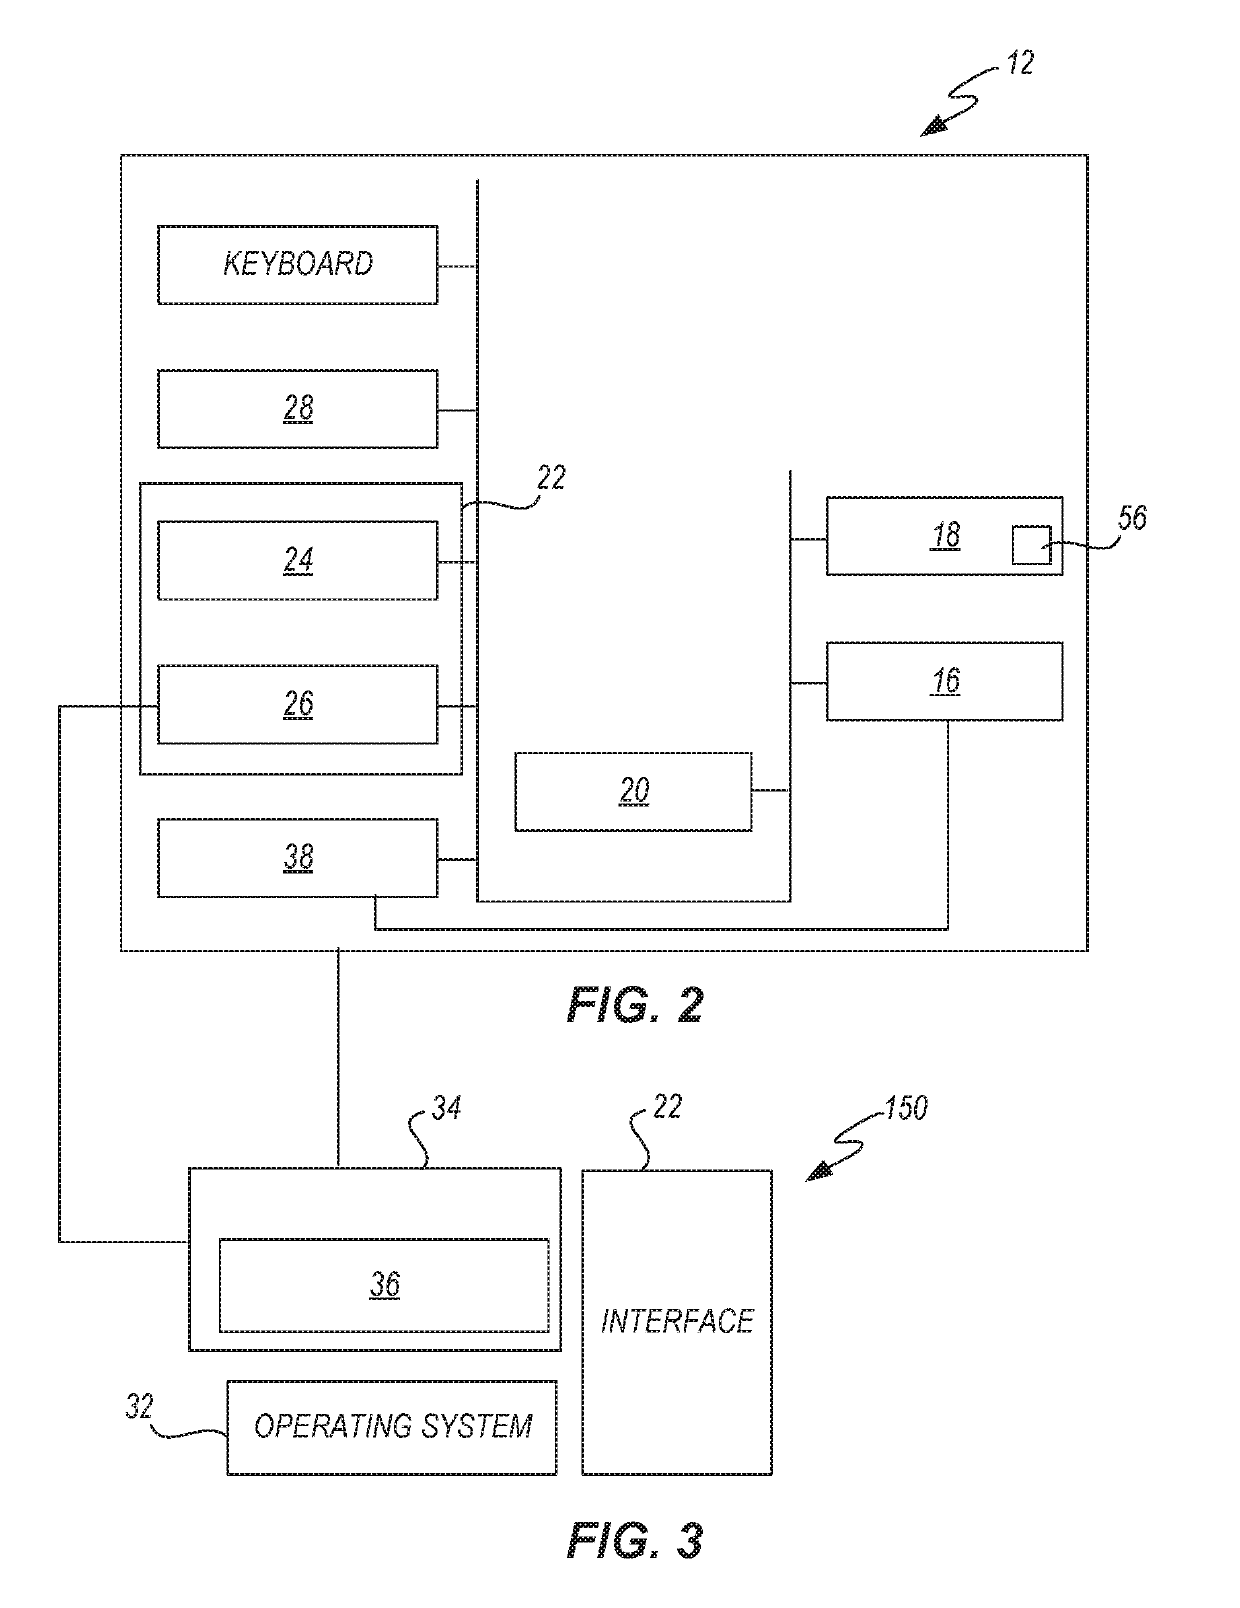 System for managing an instructure with security